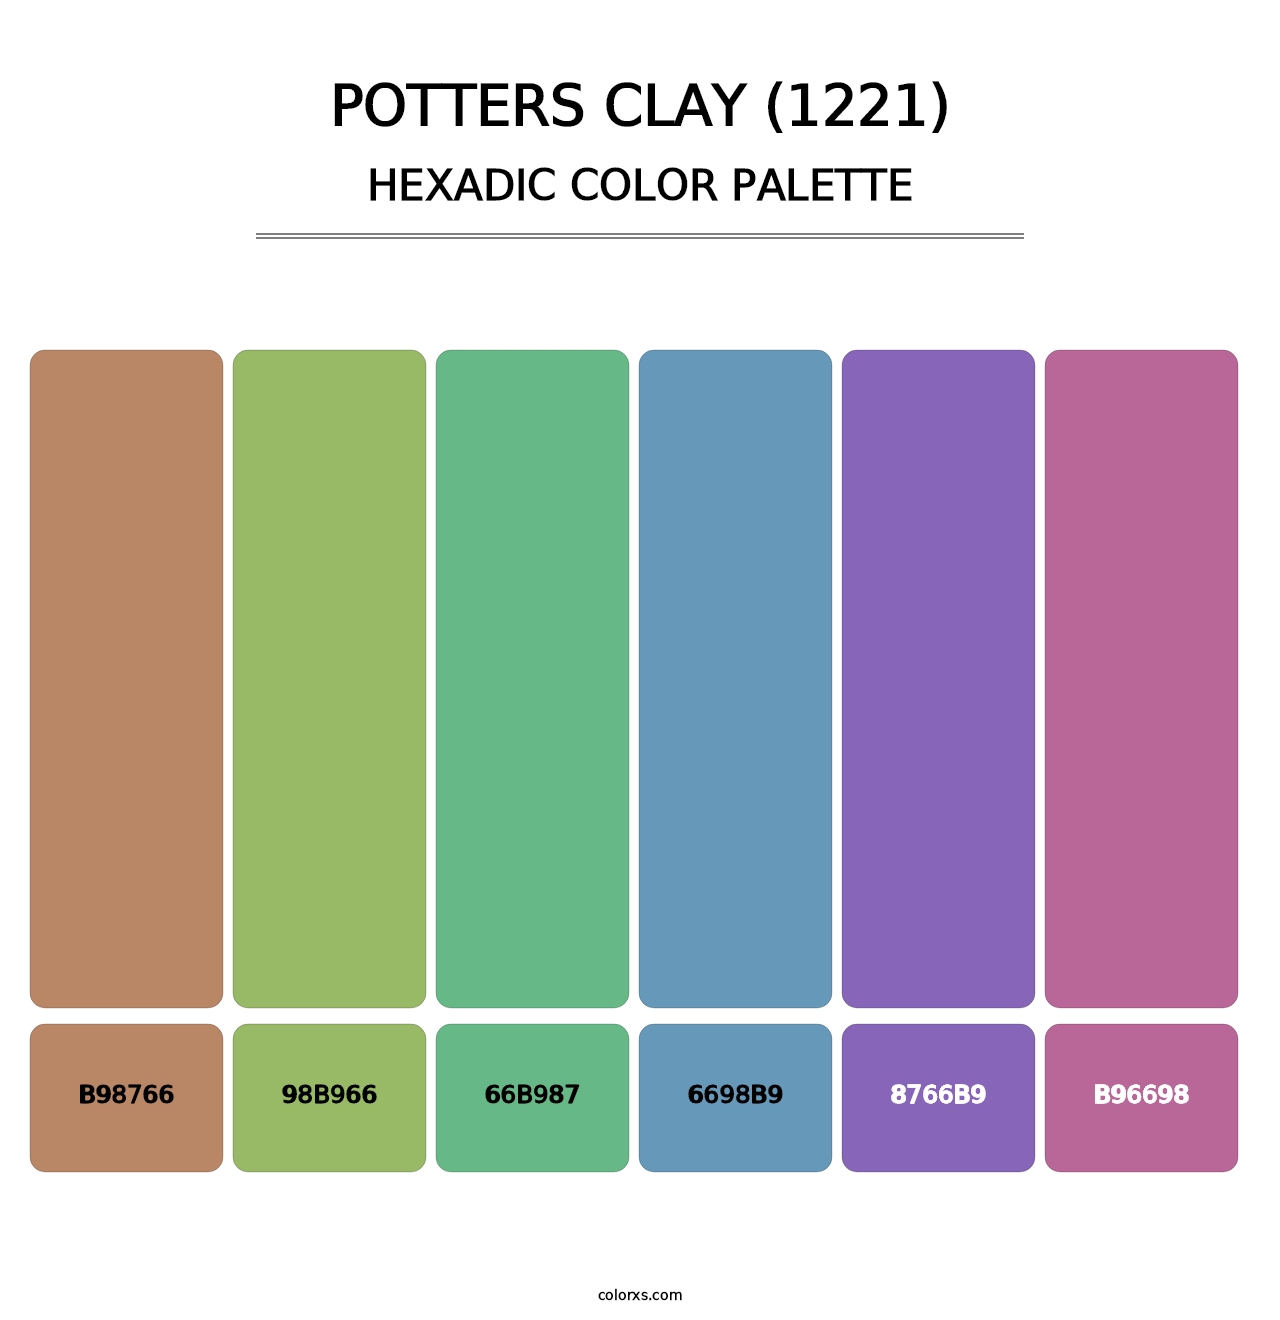 Potters Clay (1221) - Hexadic Color Palette